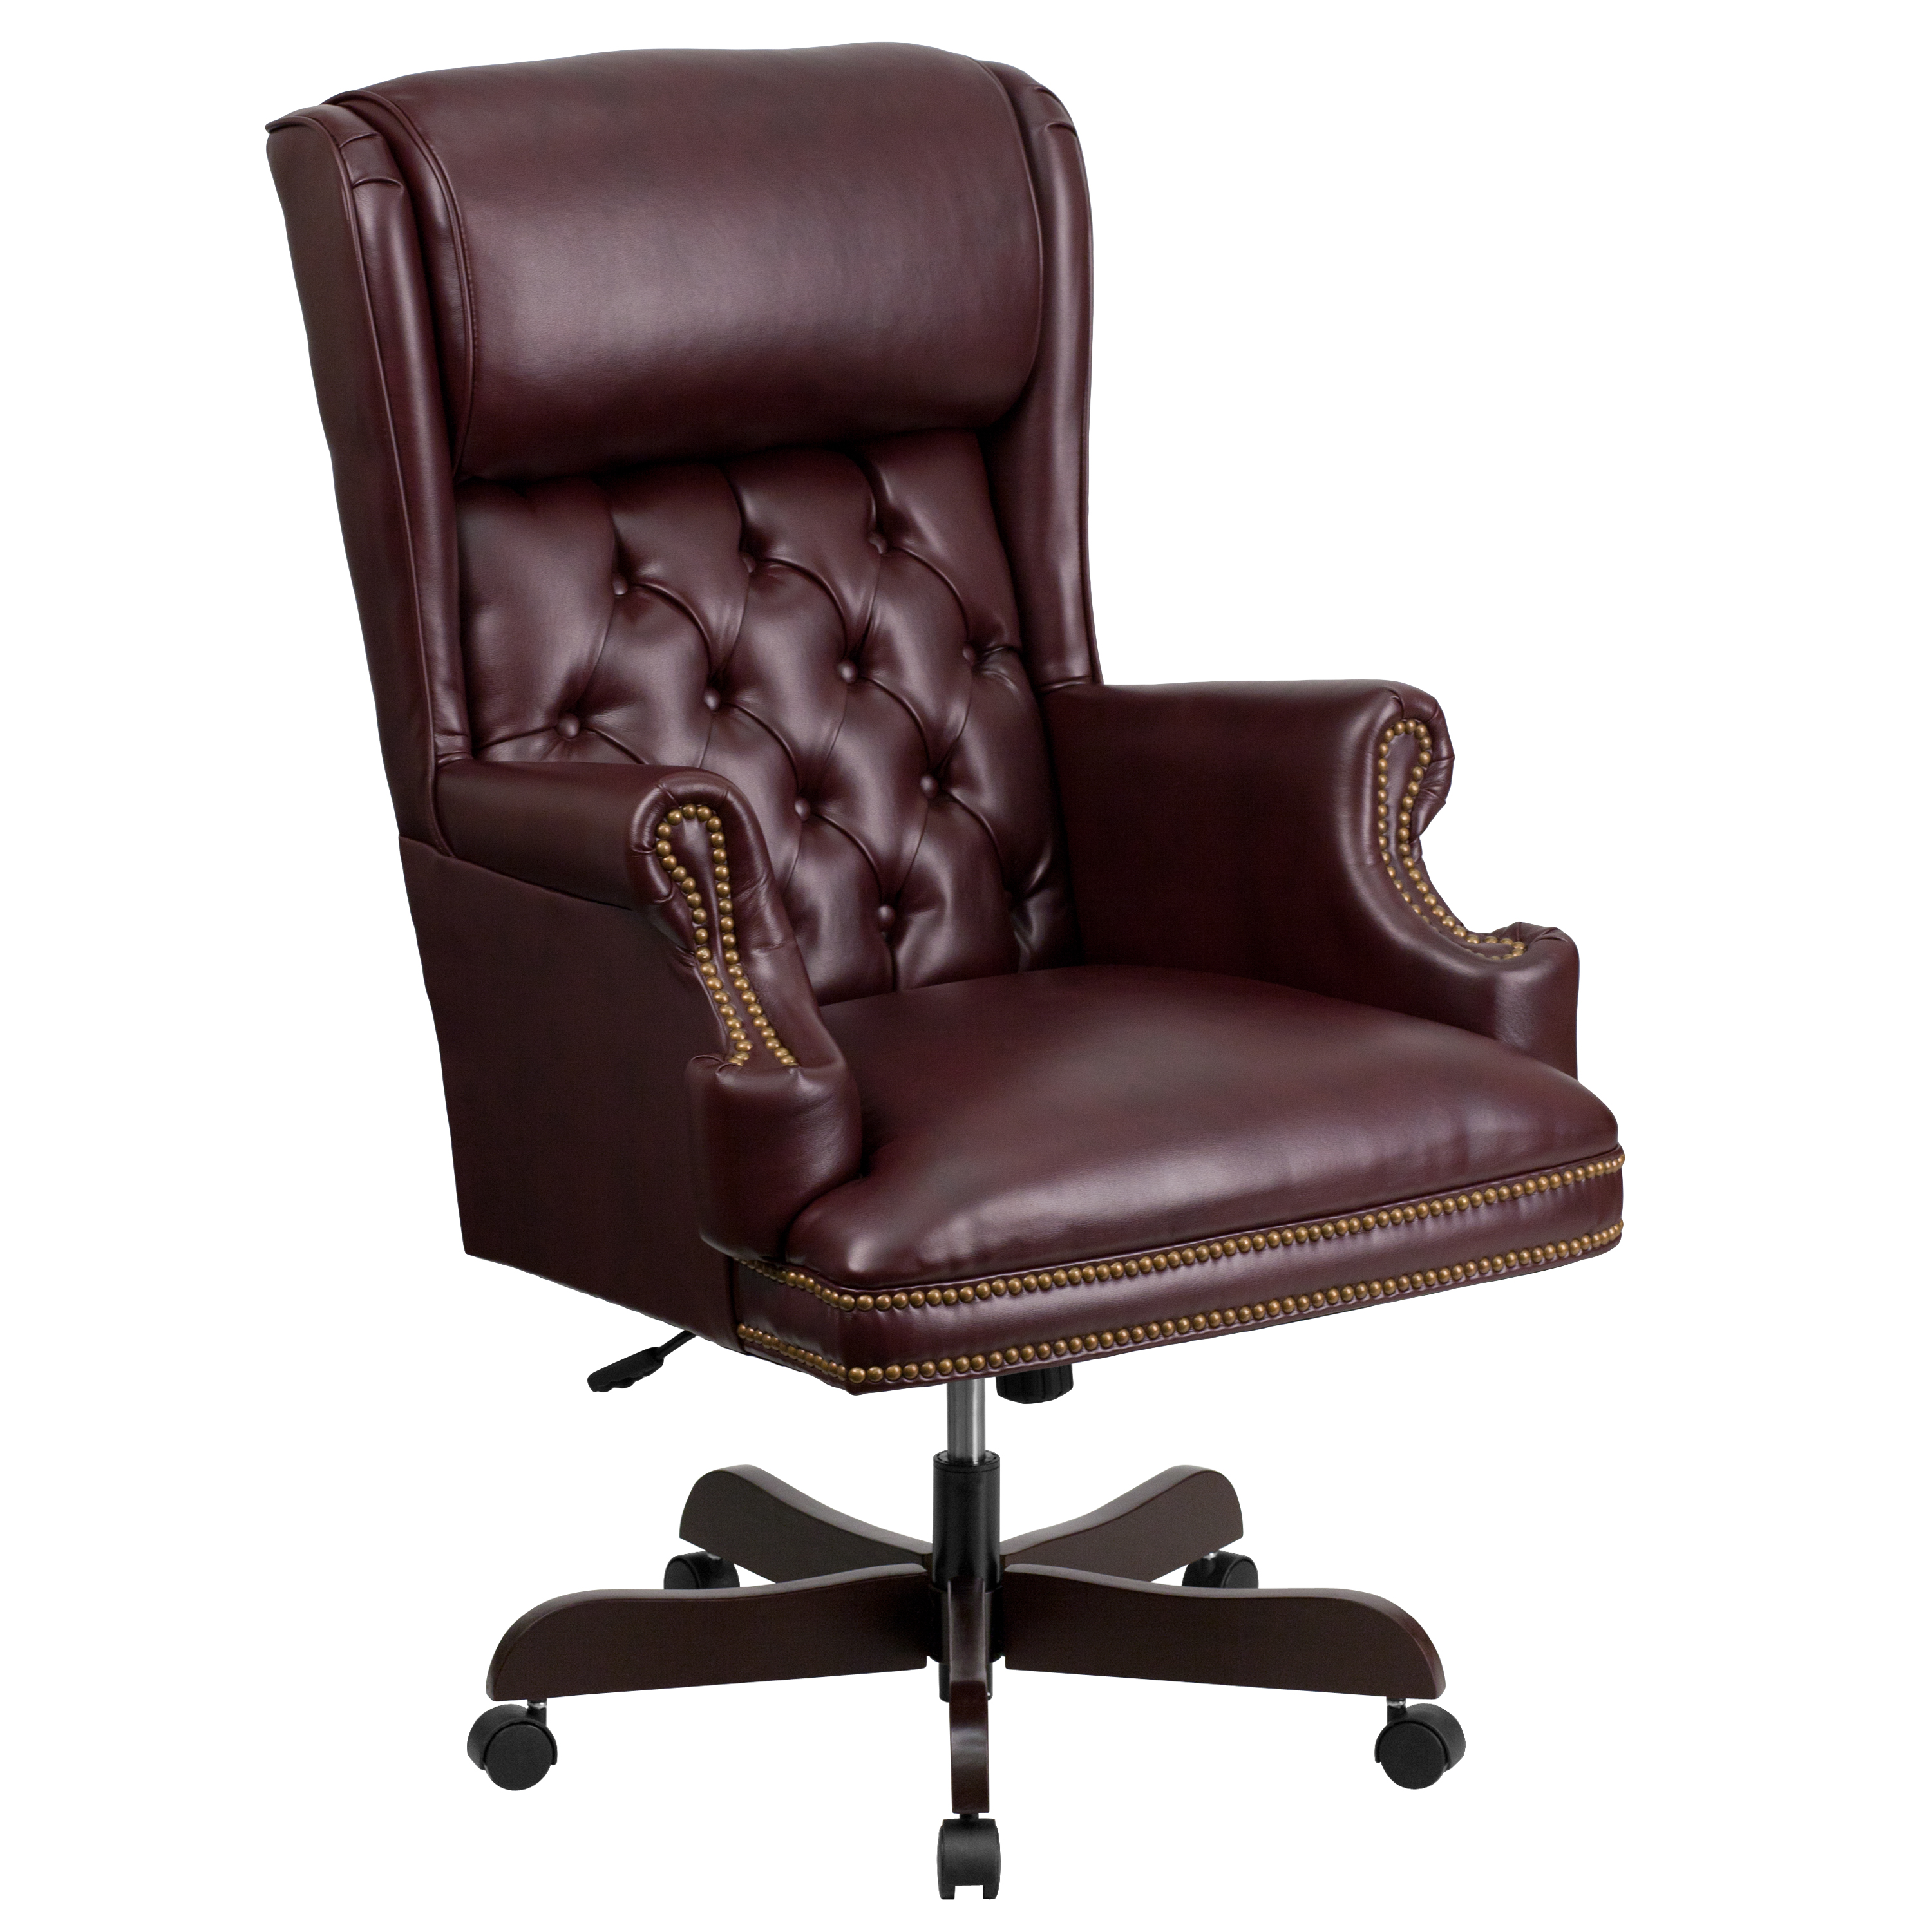 Flash Furniture CI-J600-BY-GG High Back Traditional Tufted Burgundy LeatherSoft Executive Office Chair with Oversized Headrest & Arms